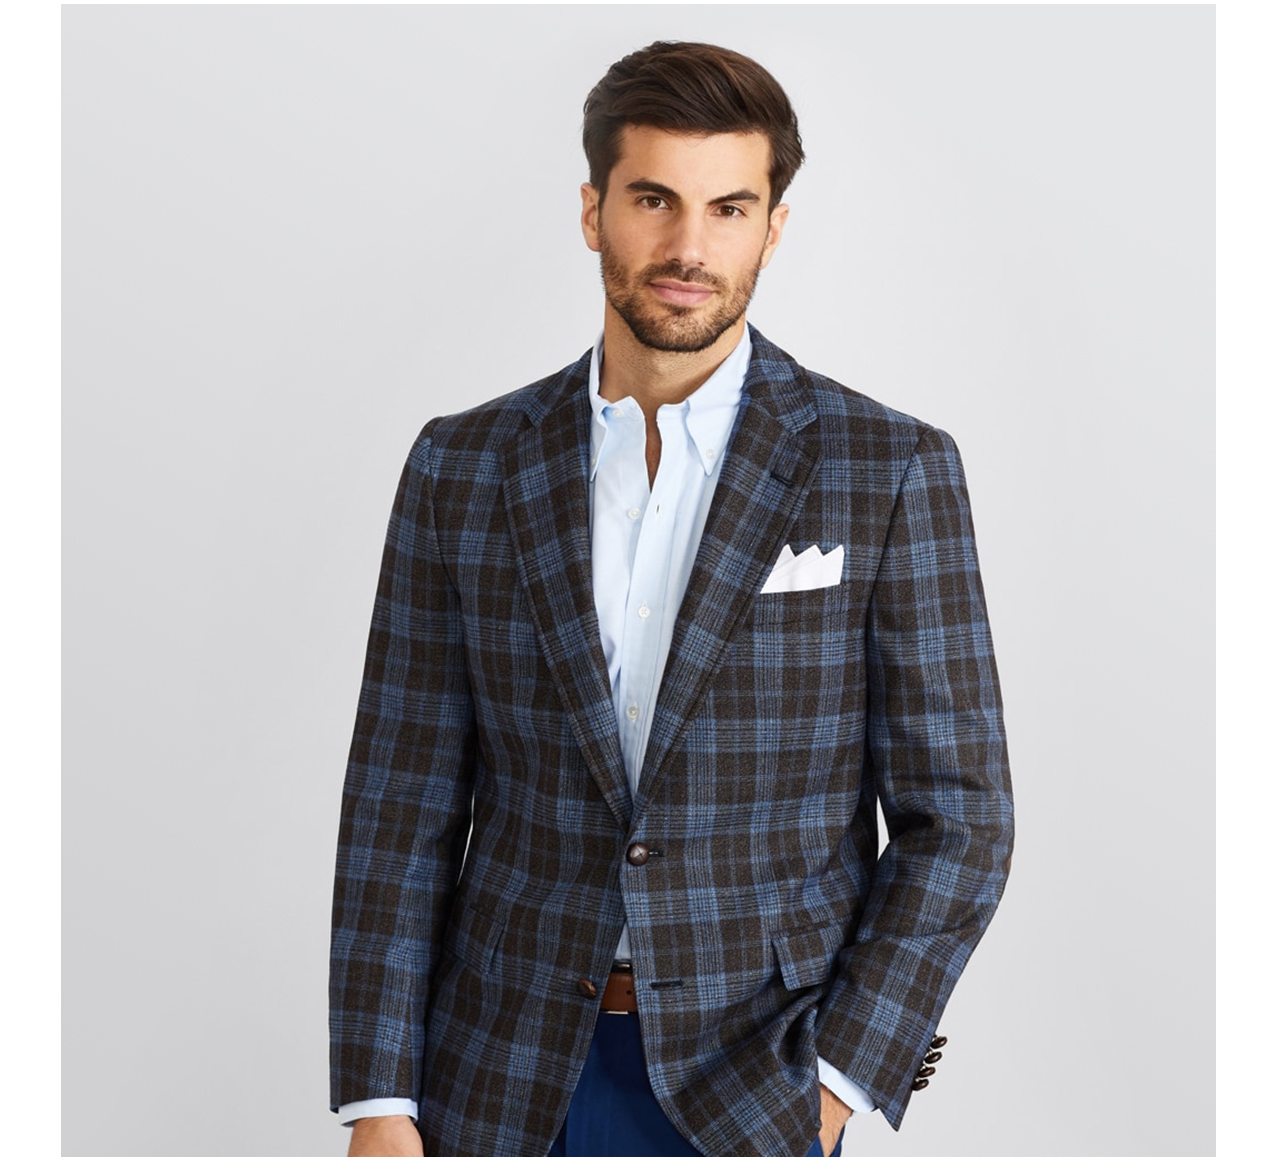 Look Ahead Now's the perfect time to refresh your wardrobe with our new soft, minimally constructed sport coats and more.